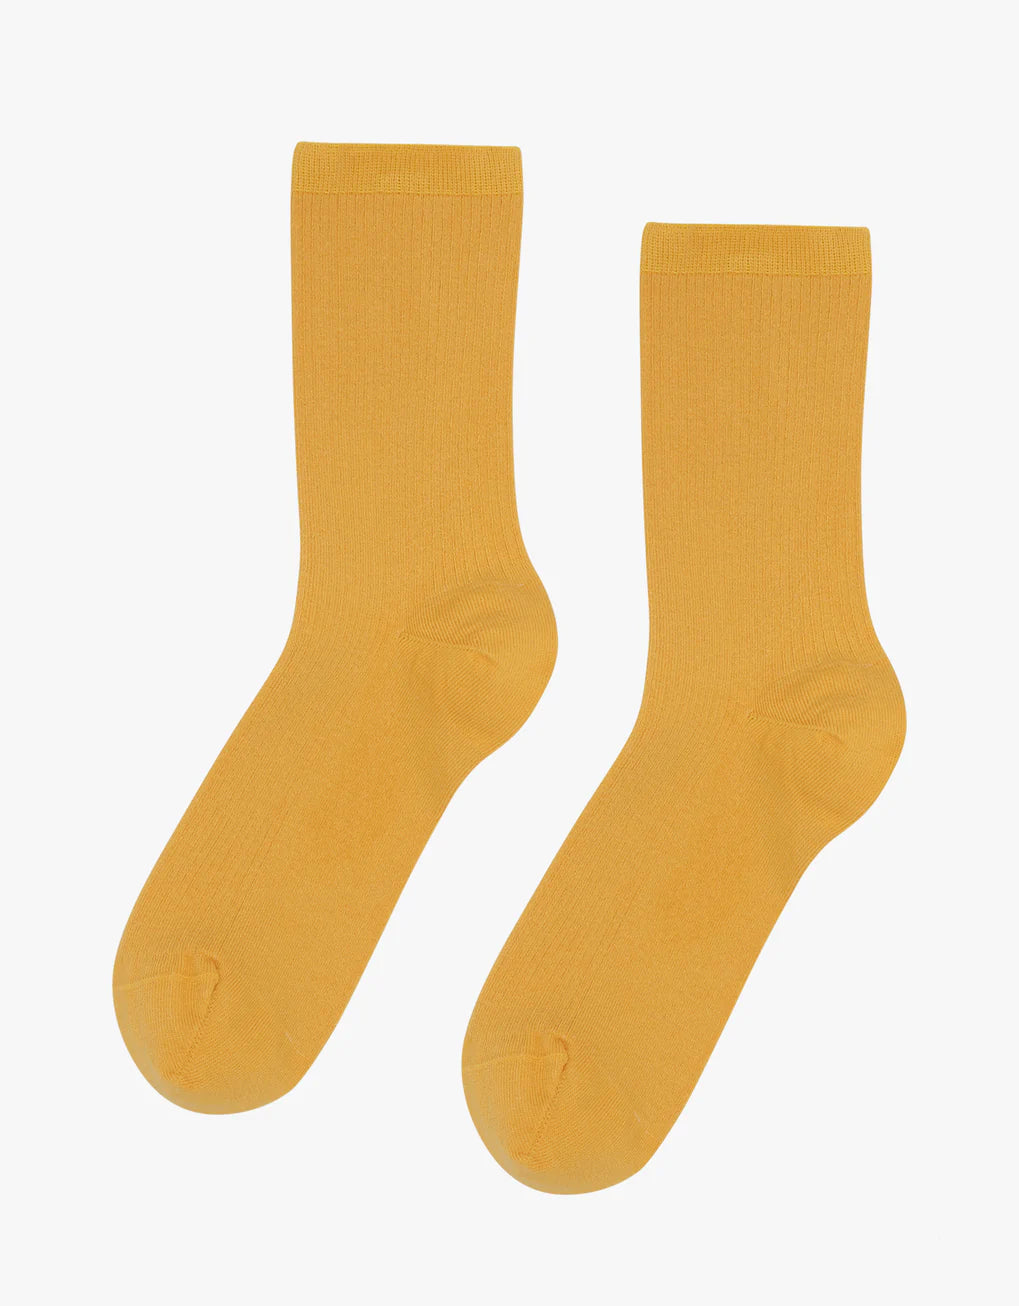 A pair of Colorful Standard Classic Organic Socks on a white background.